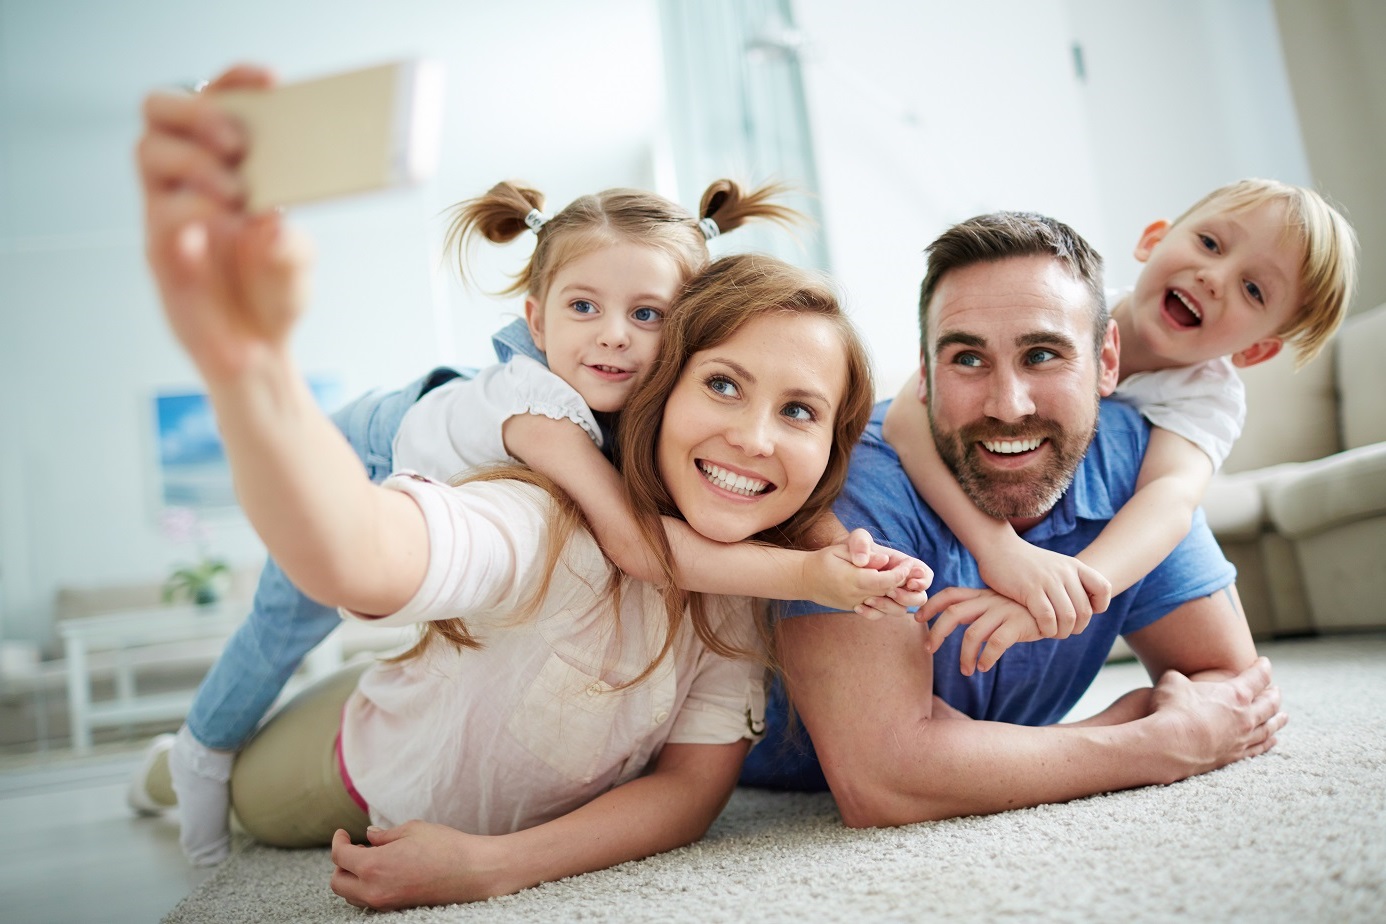 parents taking selfie with two young children on floor